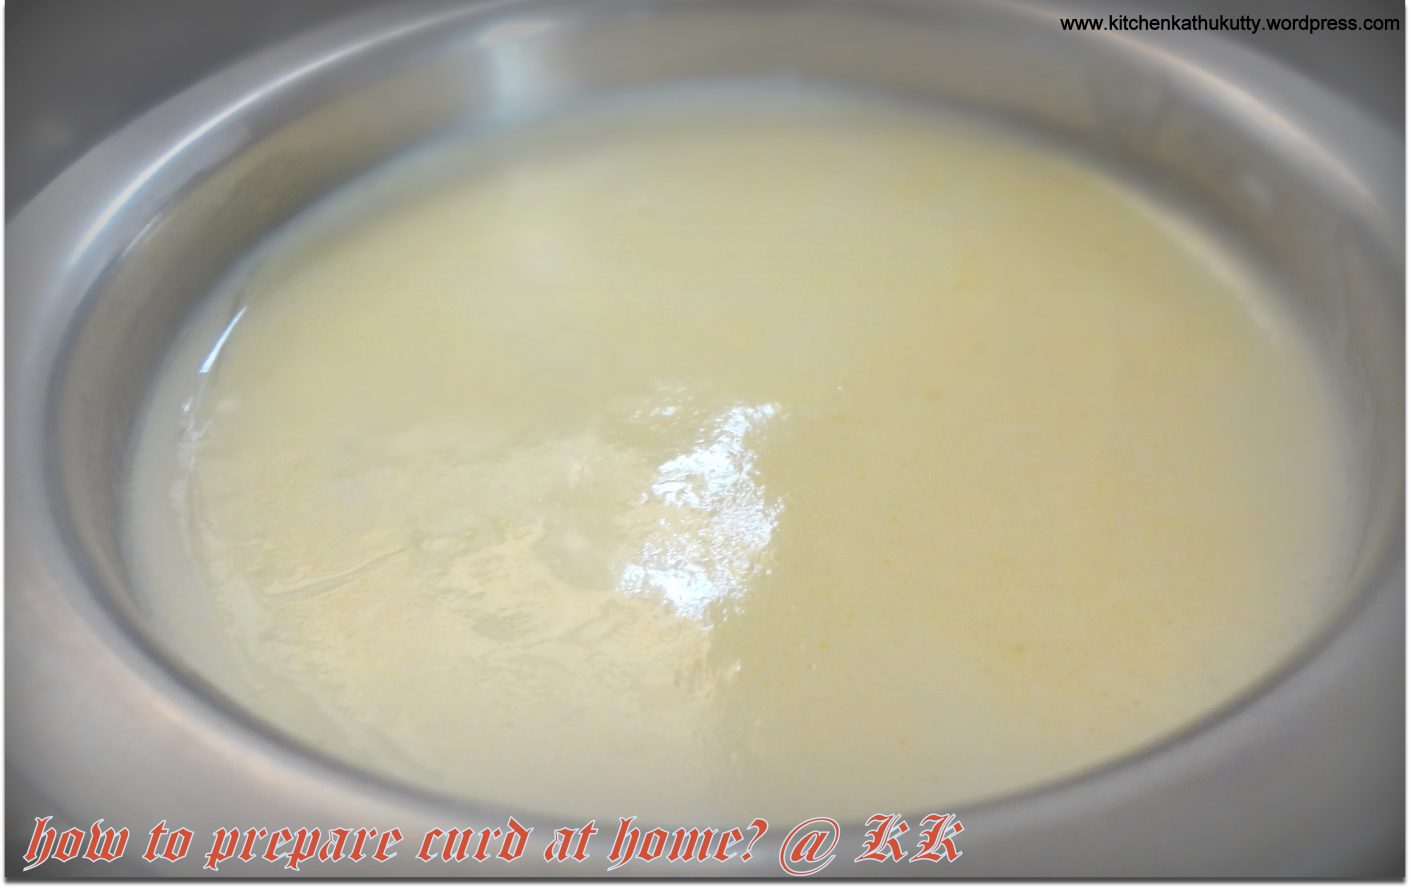 how to prepare curd at home?